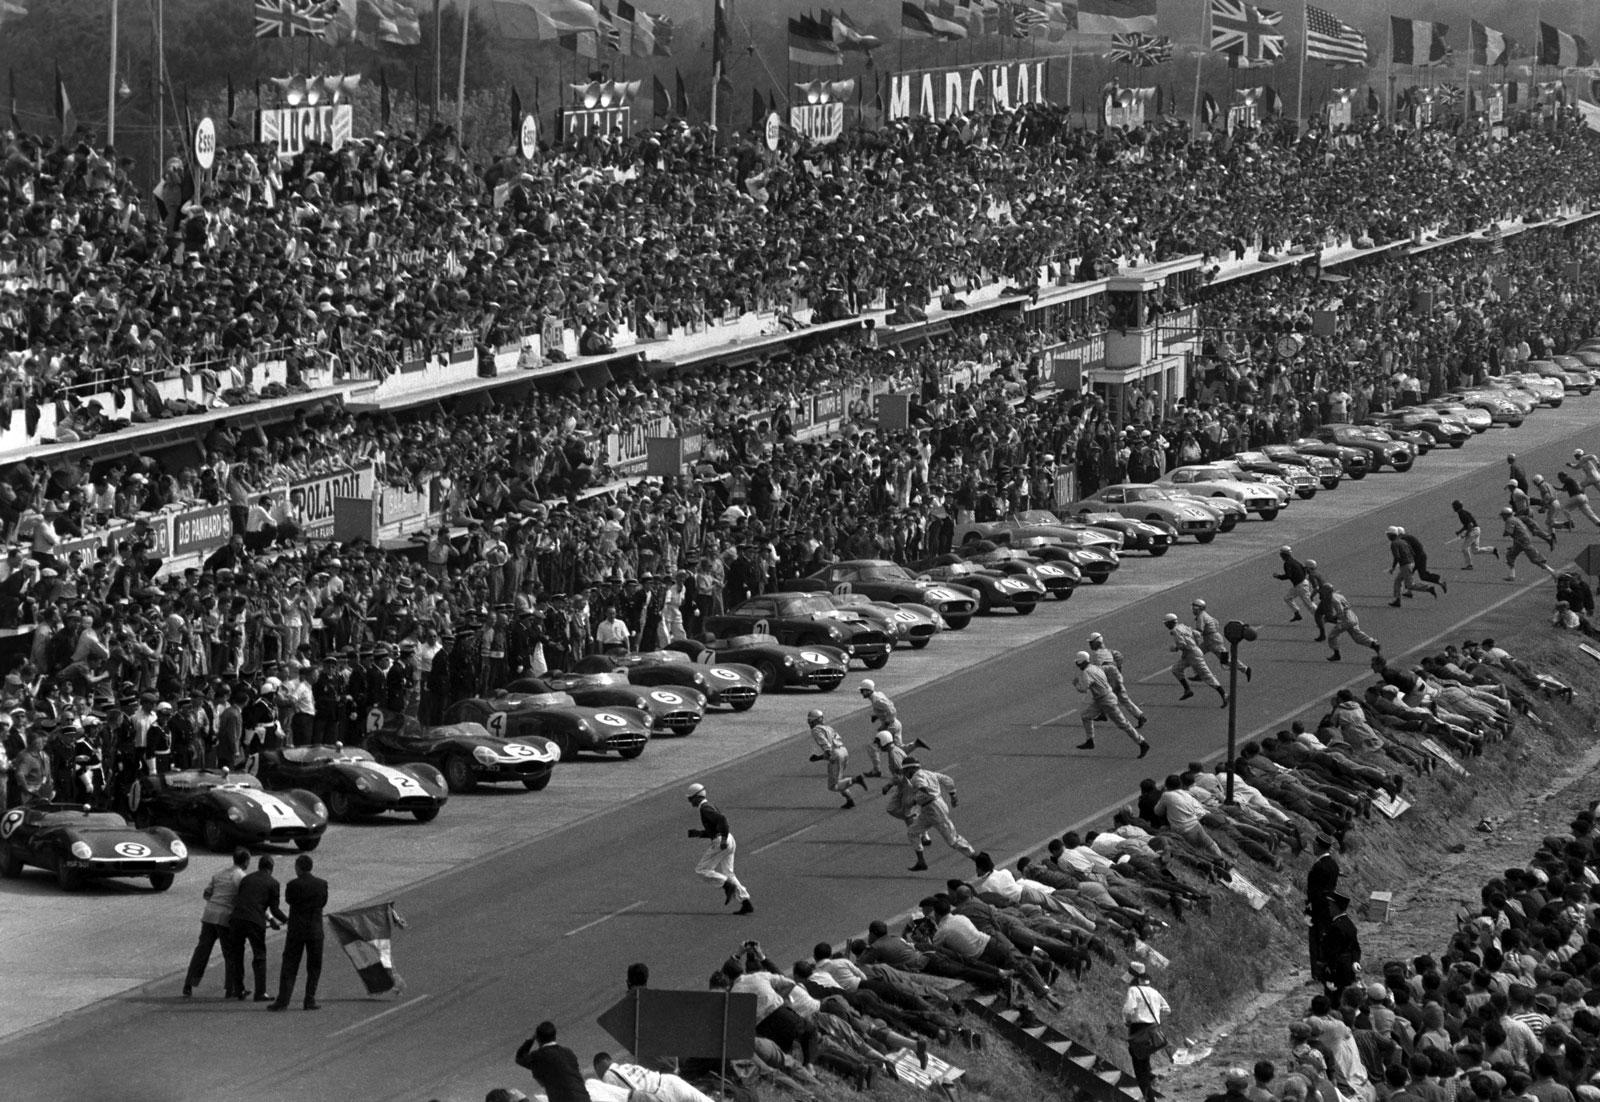 D:\Documenti\posts\posts\The 24 Hours of Le Mans - one of the most prestigious automobile races in the world\foto\8 LeMans-Start-1966.jpg